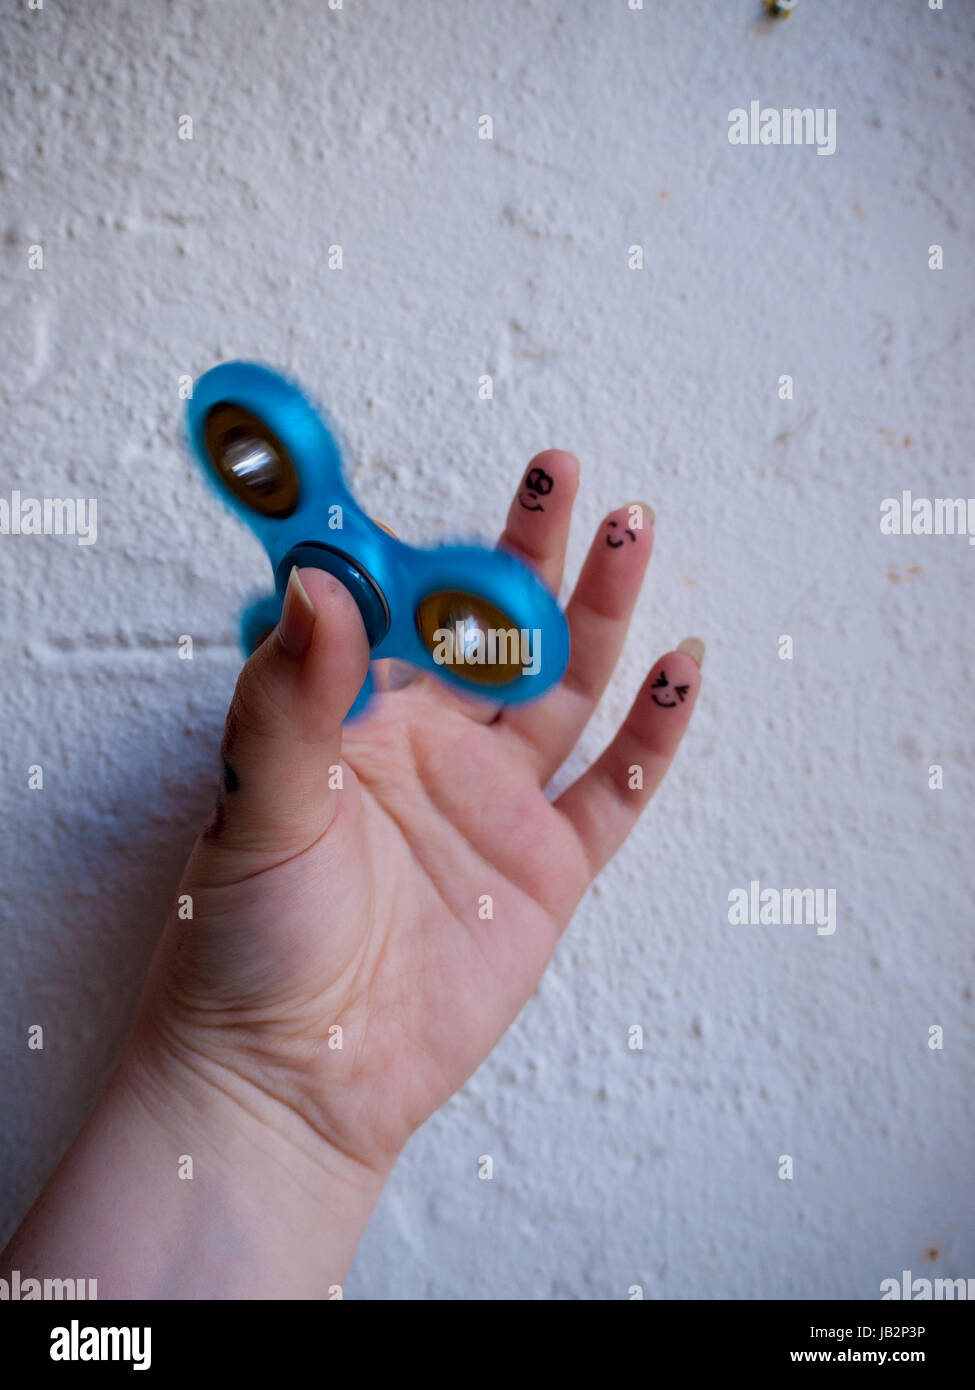 A moving fidget spinner in a hand with different smiling faces on the last three fingers Stock Photo